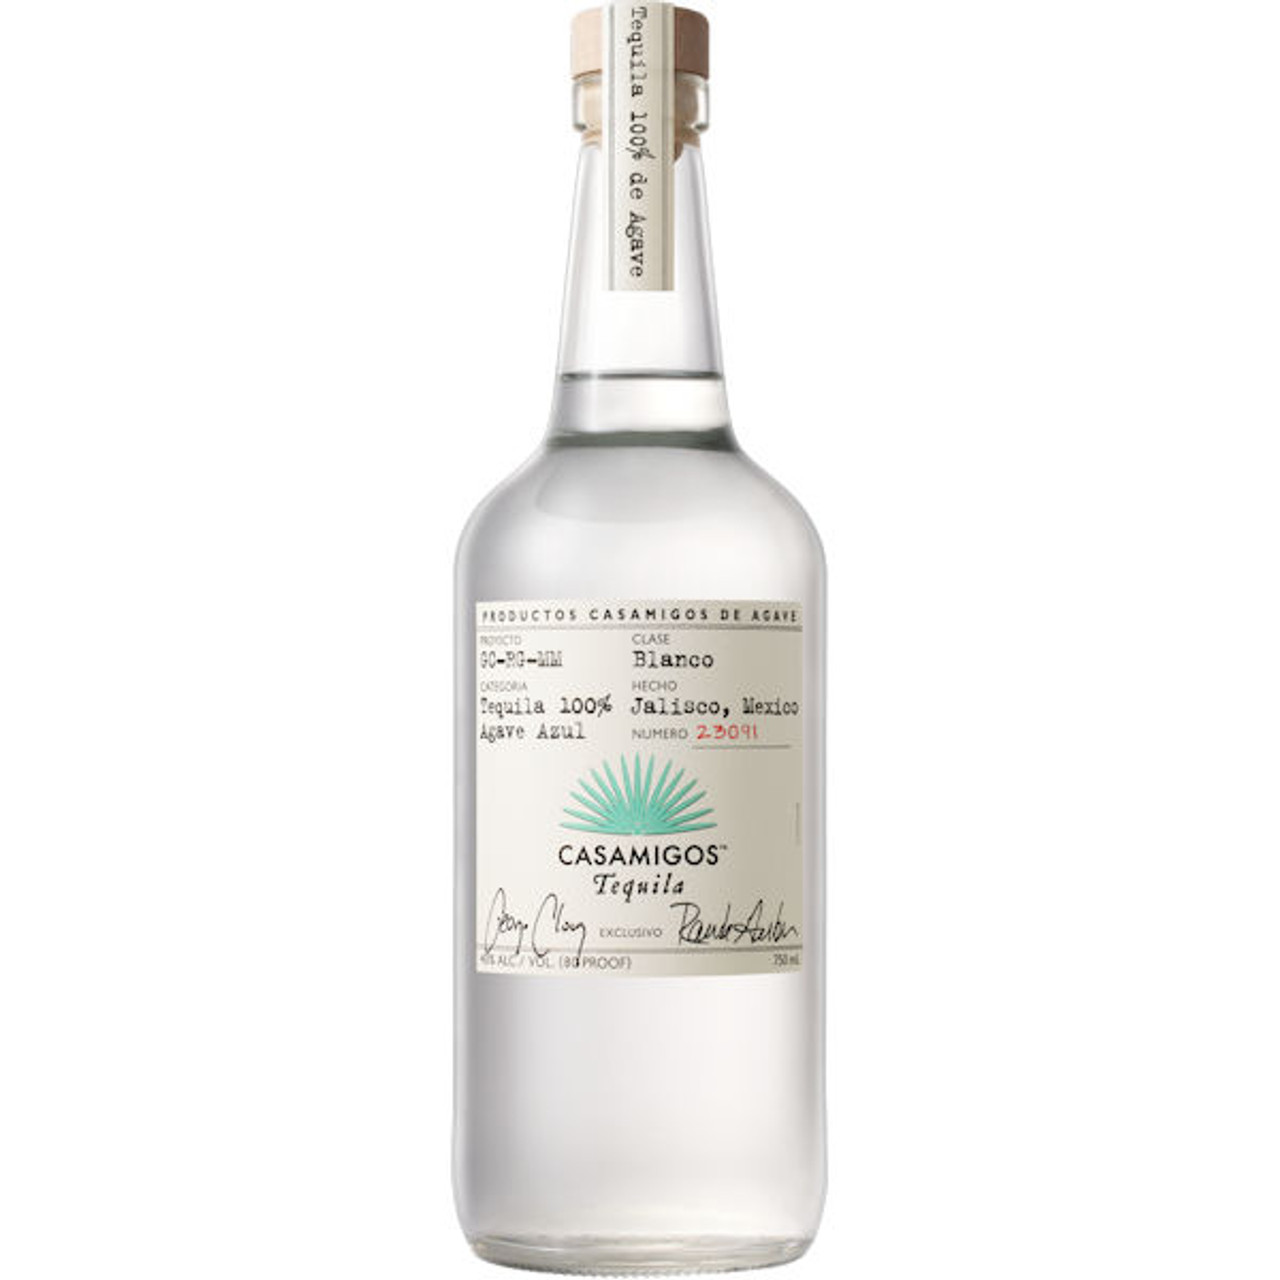 https://cdn11.bigcommerce.com/s-hg93lnuu9r/images/stencil/1280x1280/products/15984/15947/casamigos-blanco-tequila__15345__95747.1698314991.jpg?c=2?imbypass=on